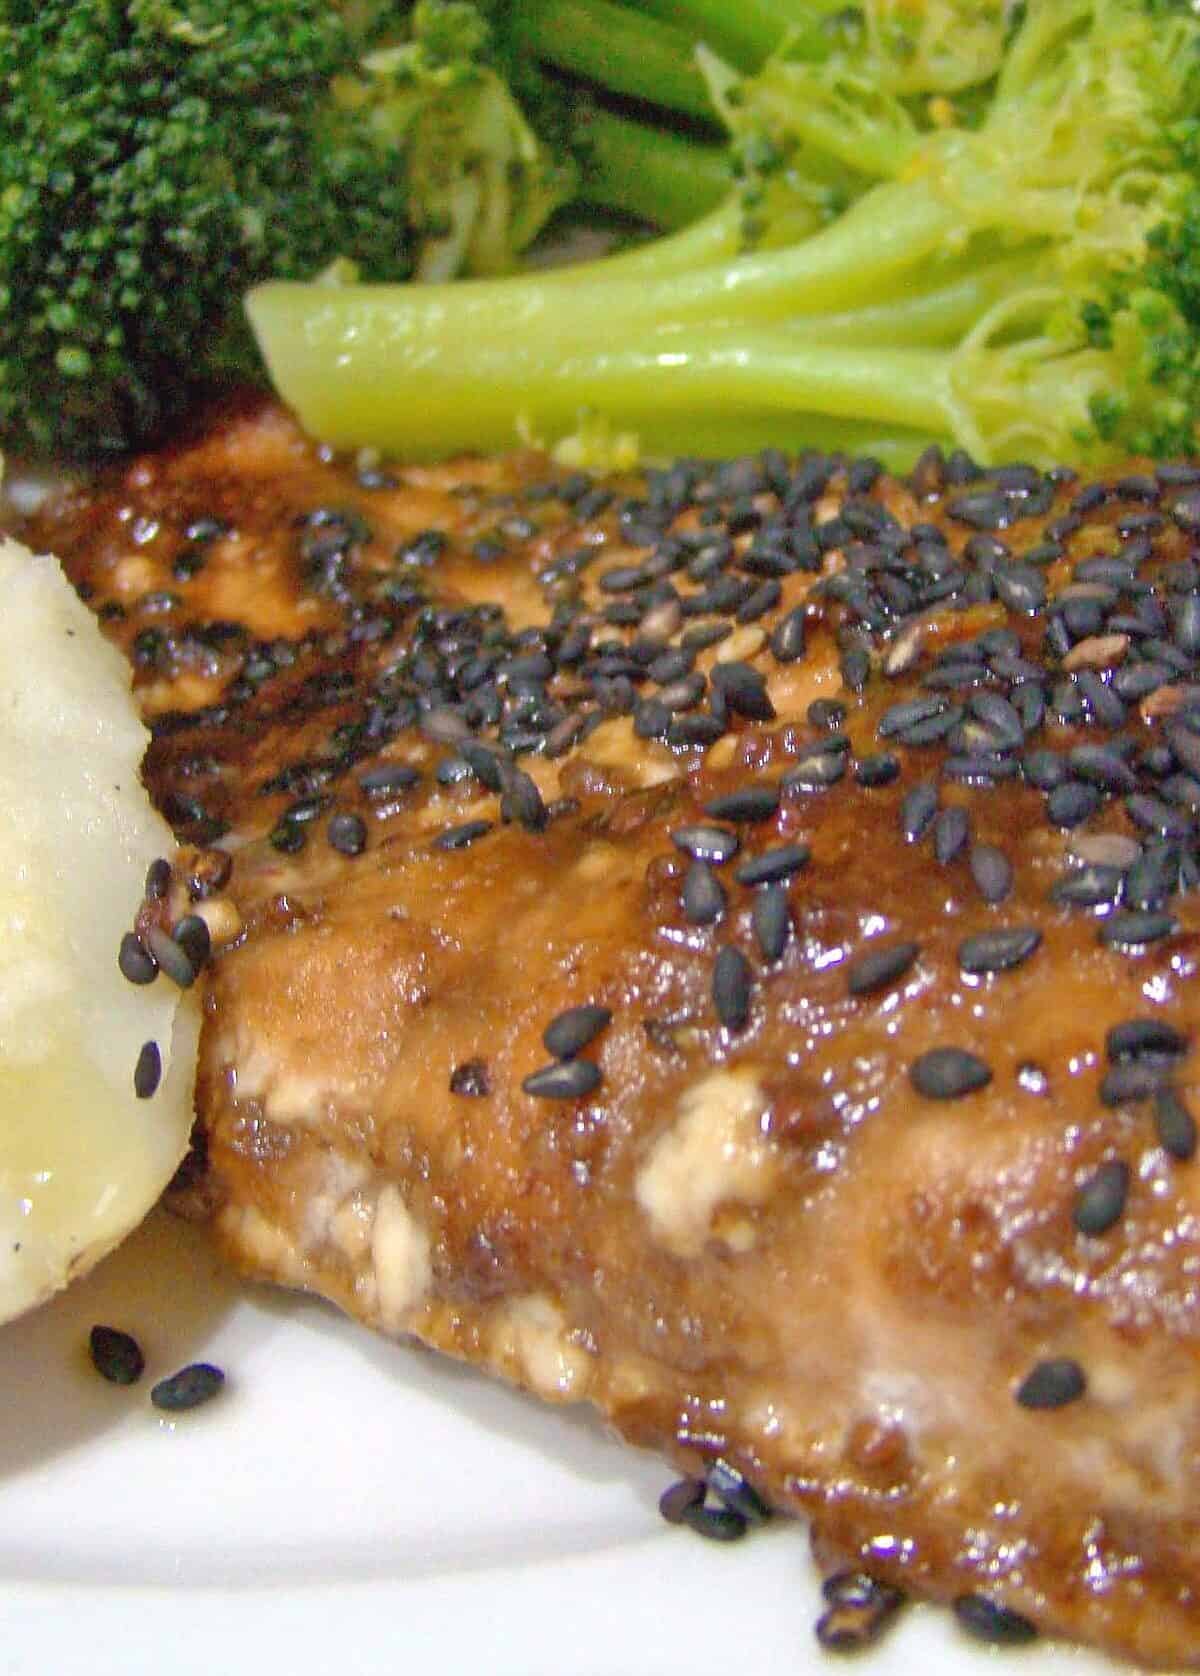  A melt-in-your-mouth salmon dish that's as easy to make as it is delicious.